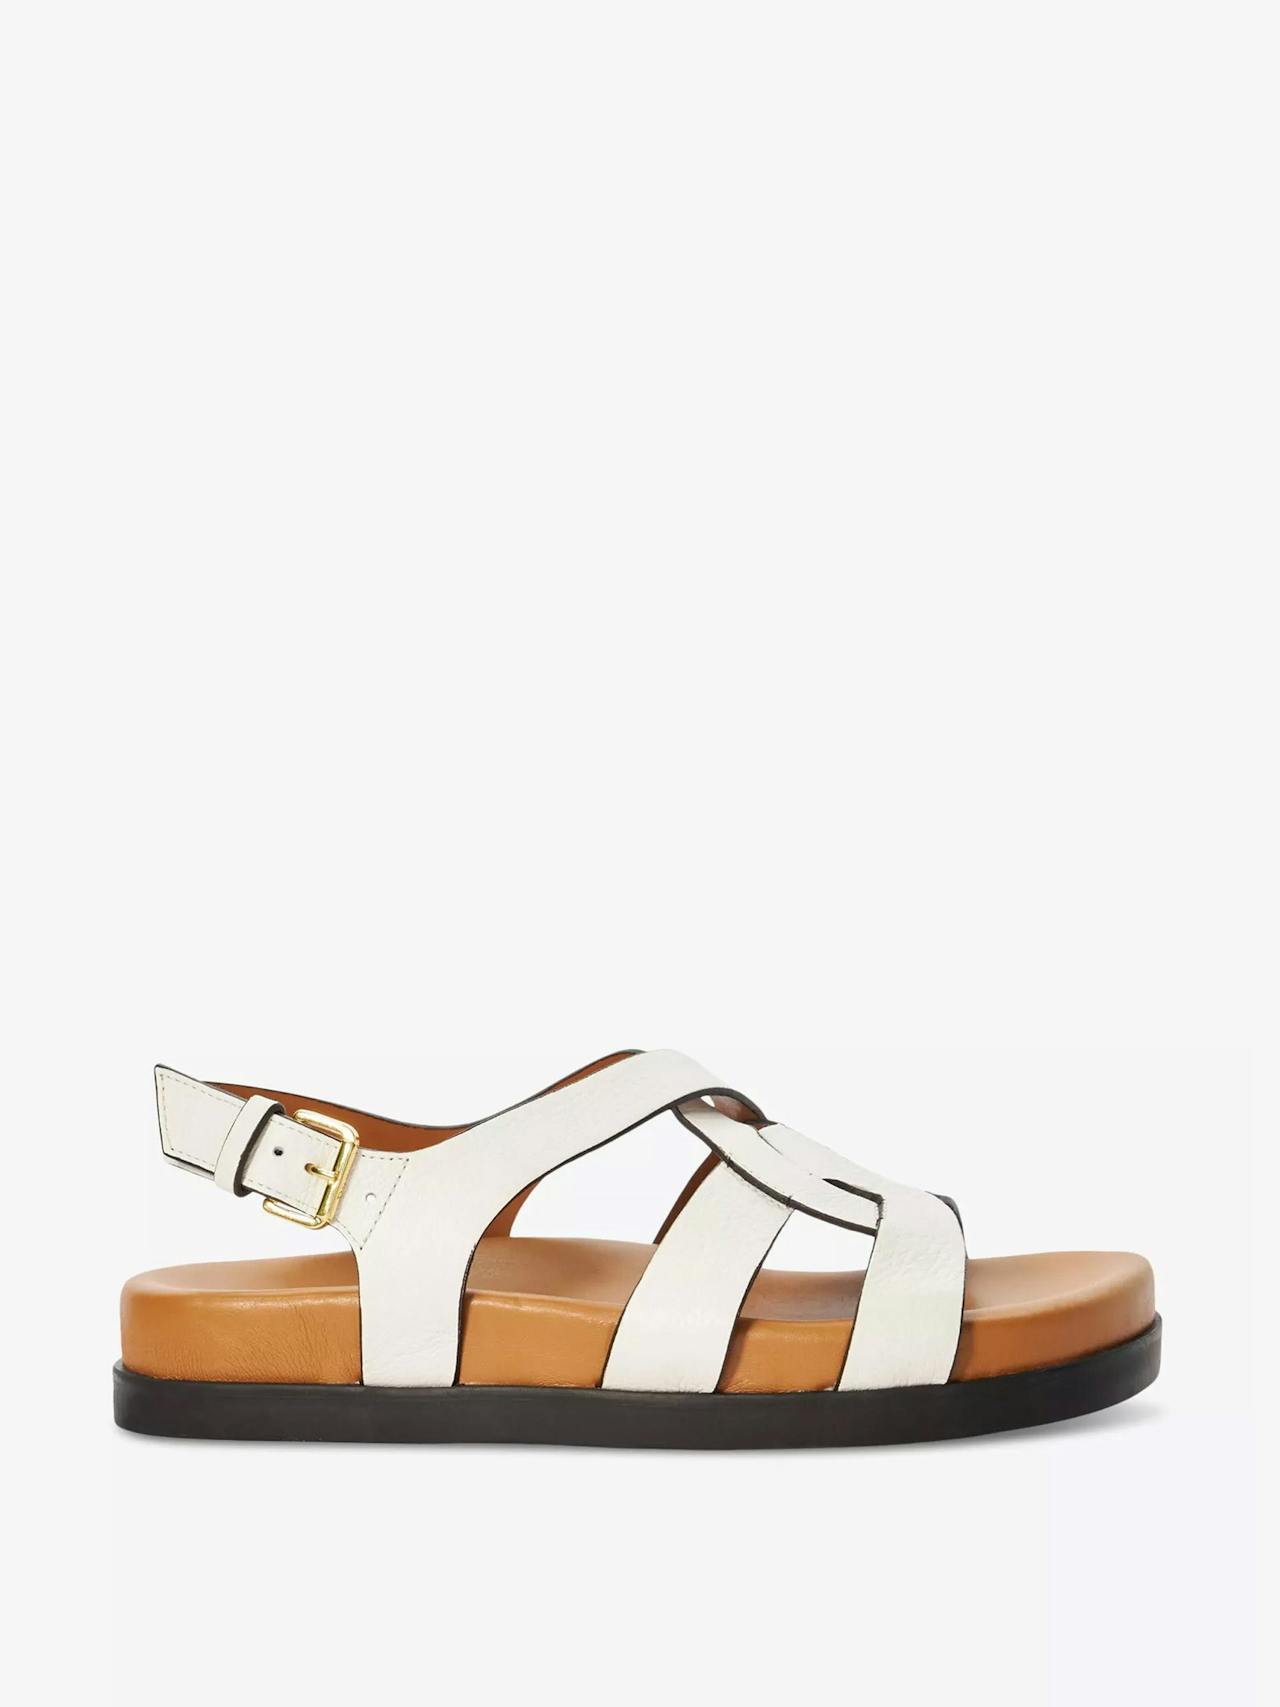 Loupin cut-out strappy leather sandals